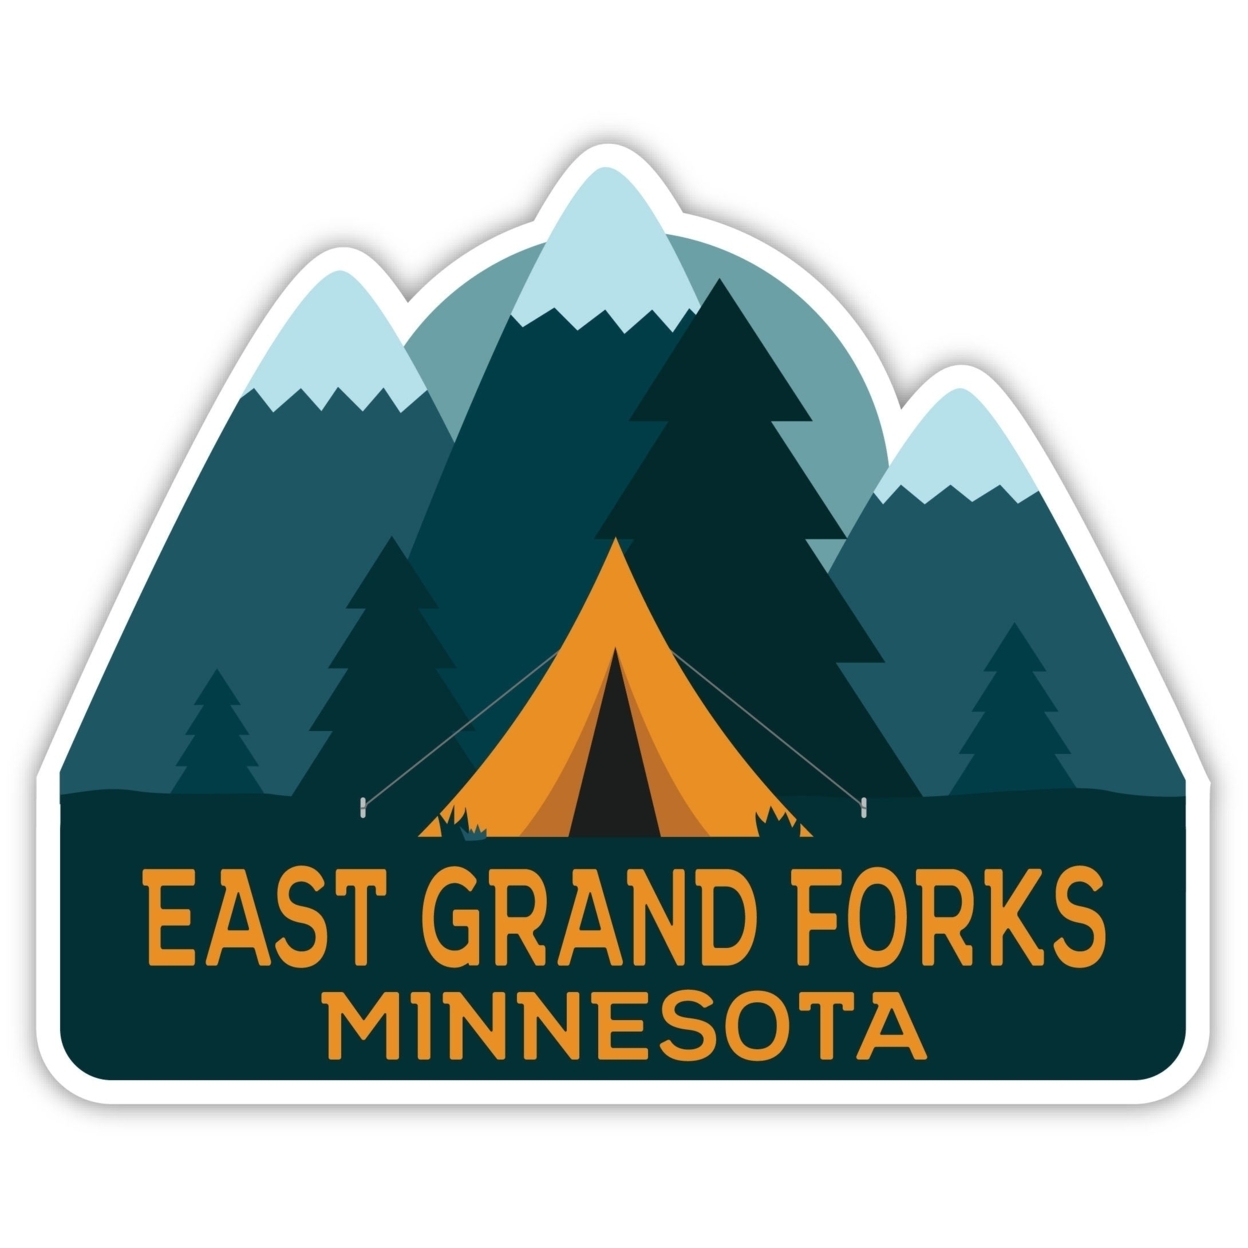 East Grand Forks Minnesota Souvenir Decorative Stickers (Choose Theme And Size) - 4-Pack, 6-Inch, Tent